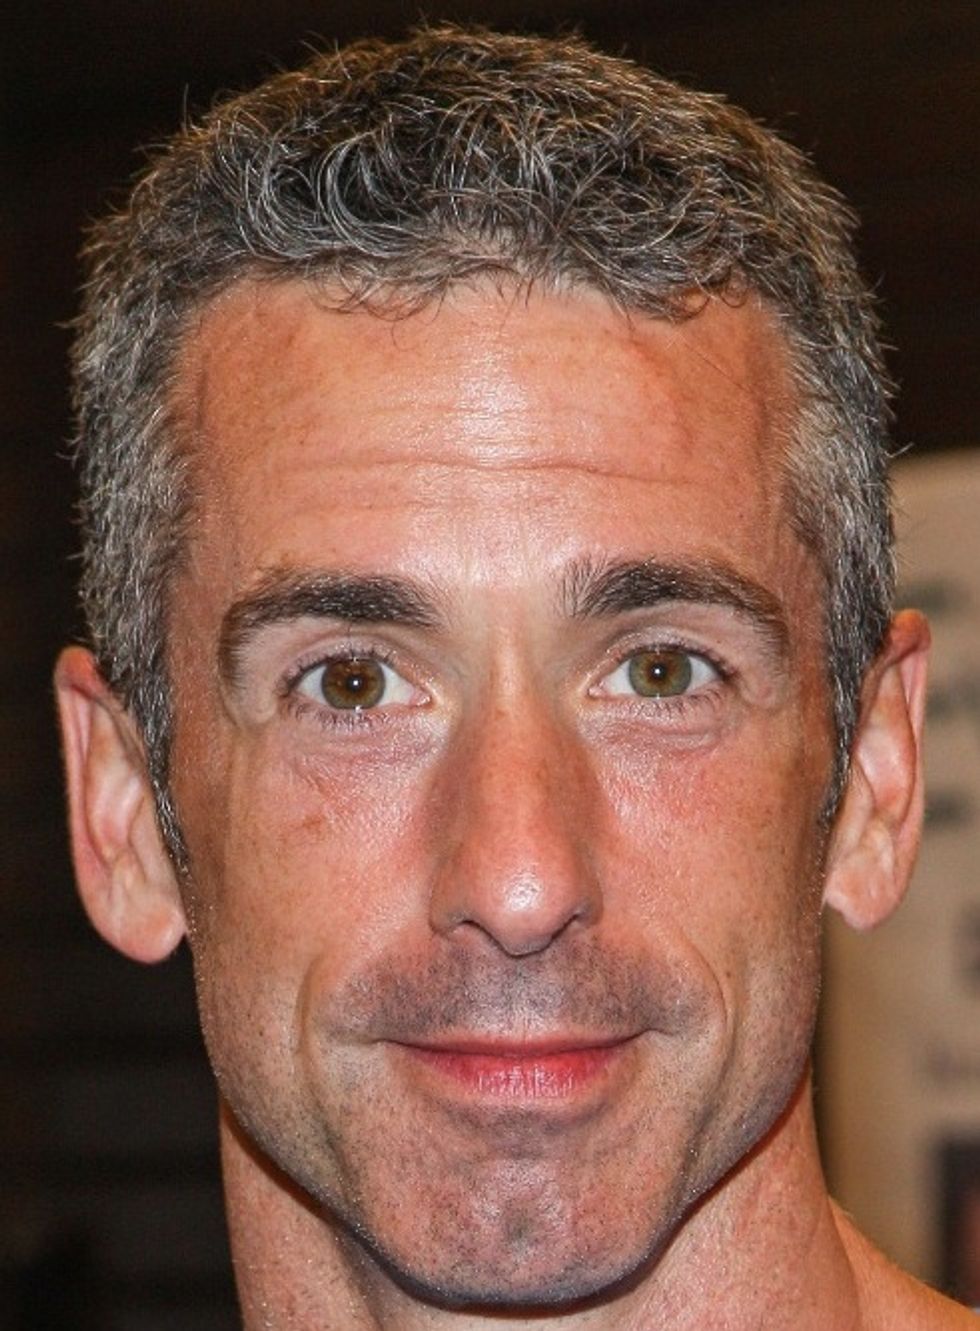 Producer of New Sitcom Based on Catholic Upbringing of Gay Activist Dan Savage Wanted Gay Actor in Key Role — but an Ironic Roadblock Stood in the Way